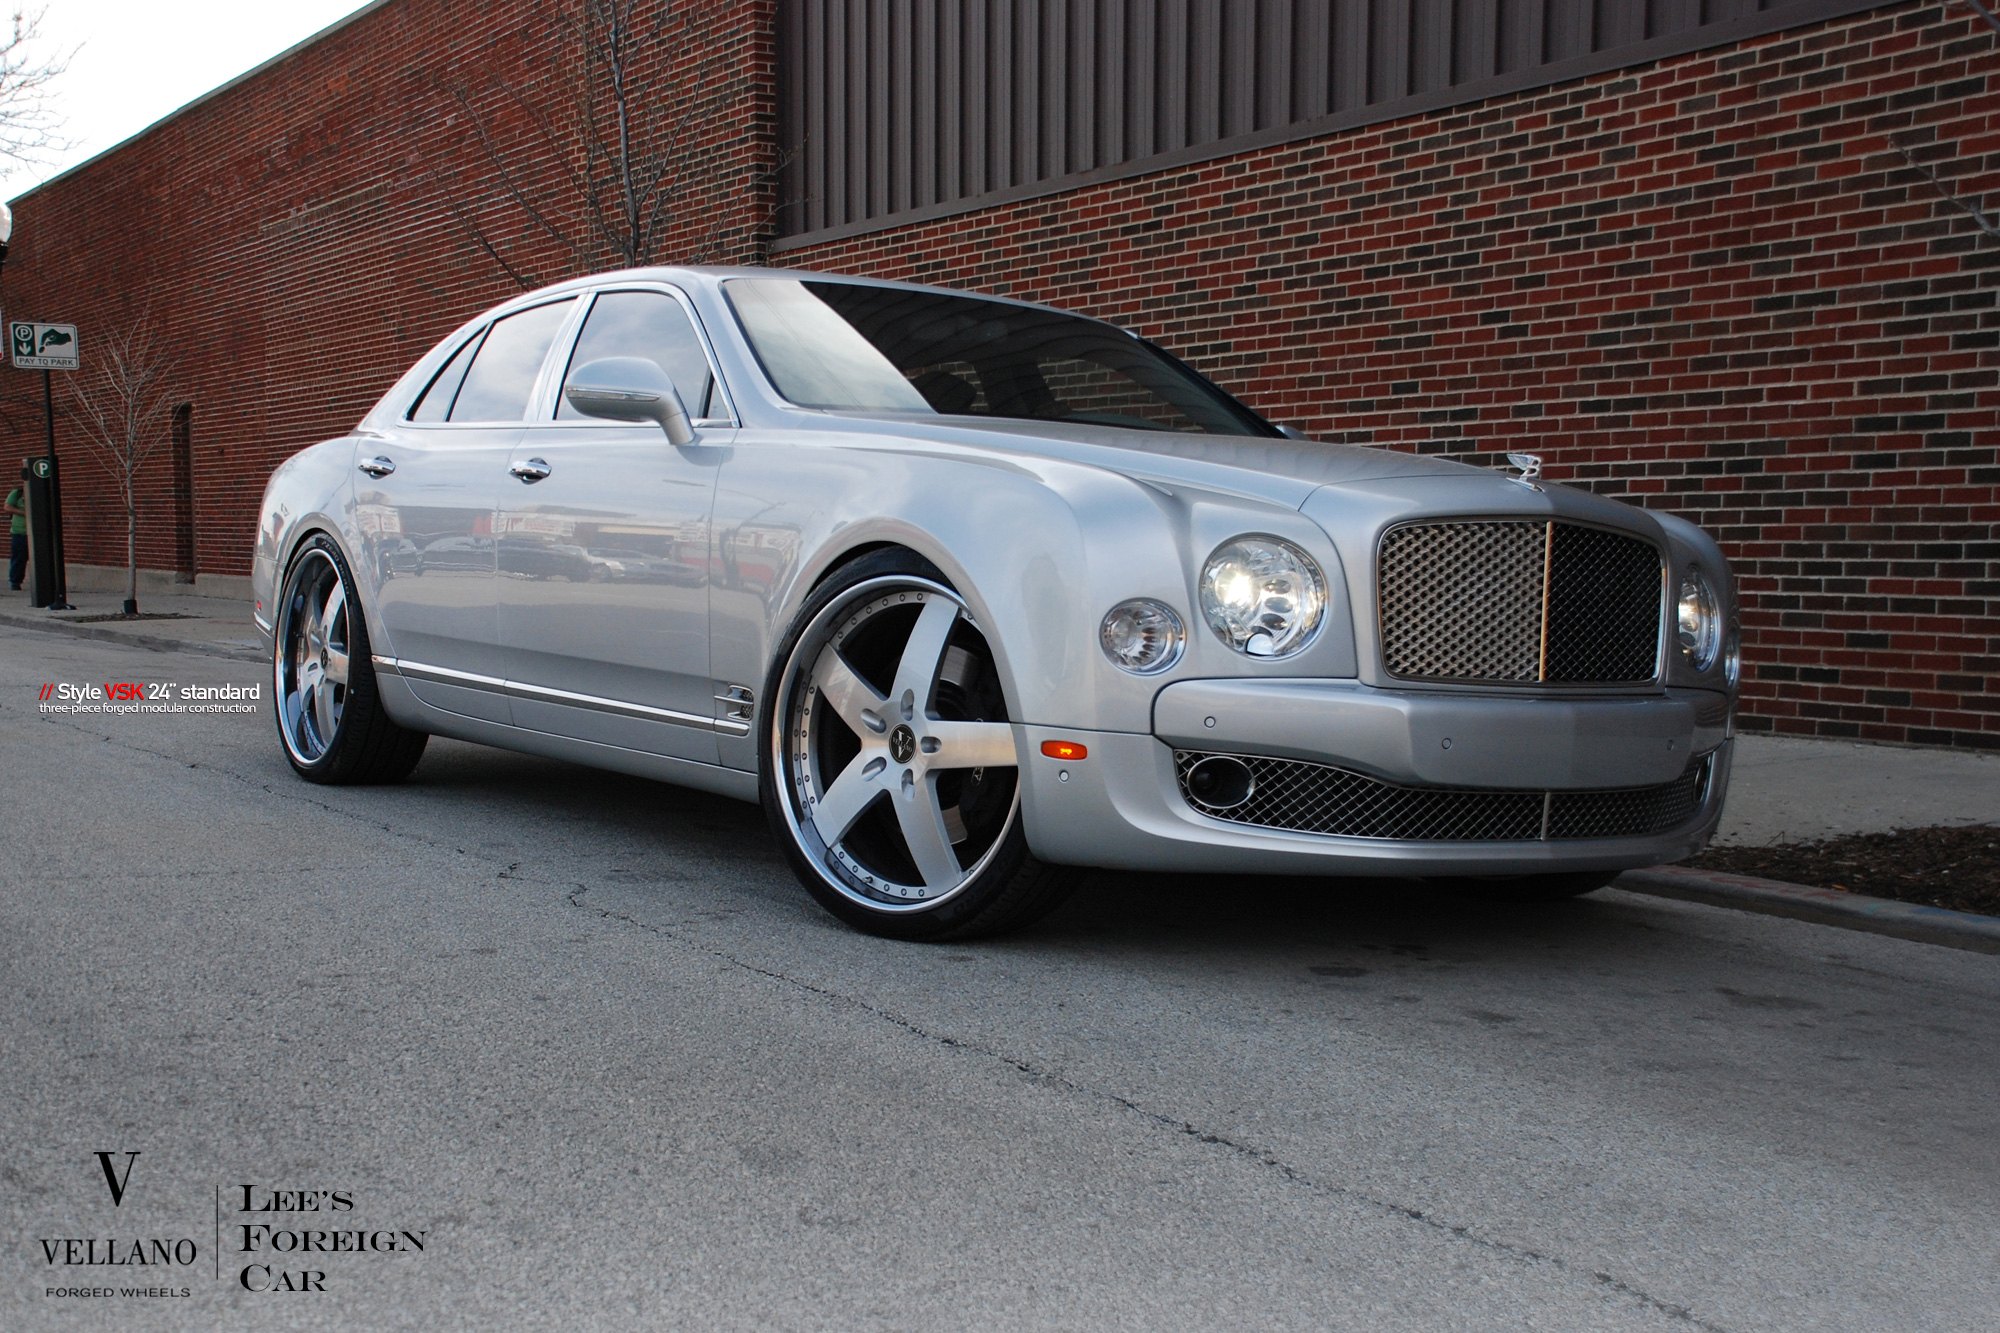 Vellano Forged Rims on Silver Bently Mulsanne - Photo by Vellano